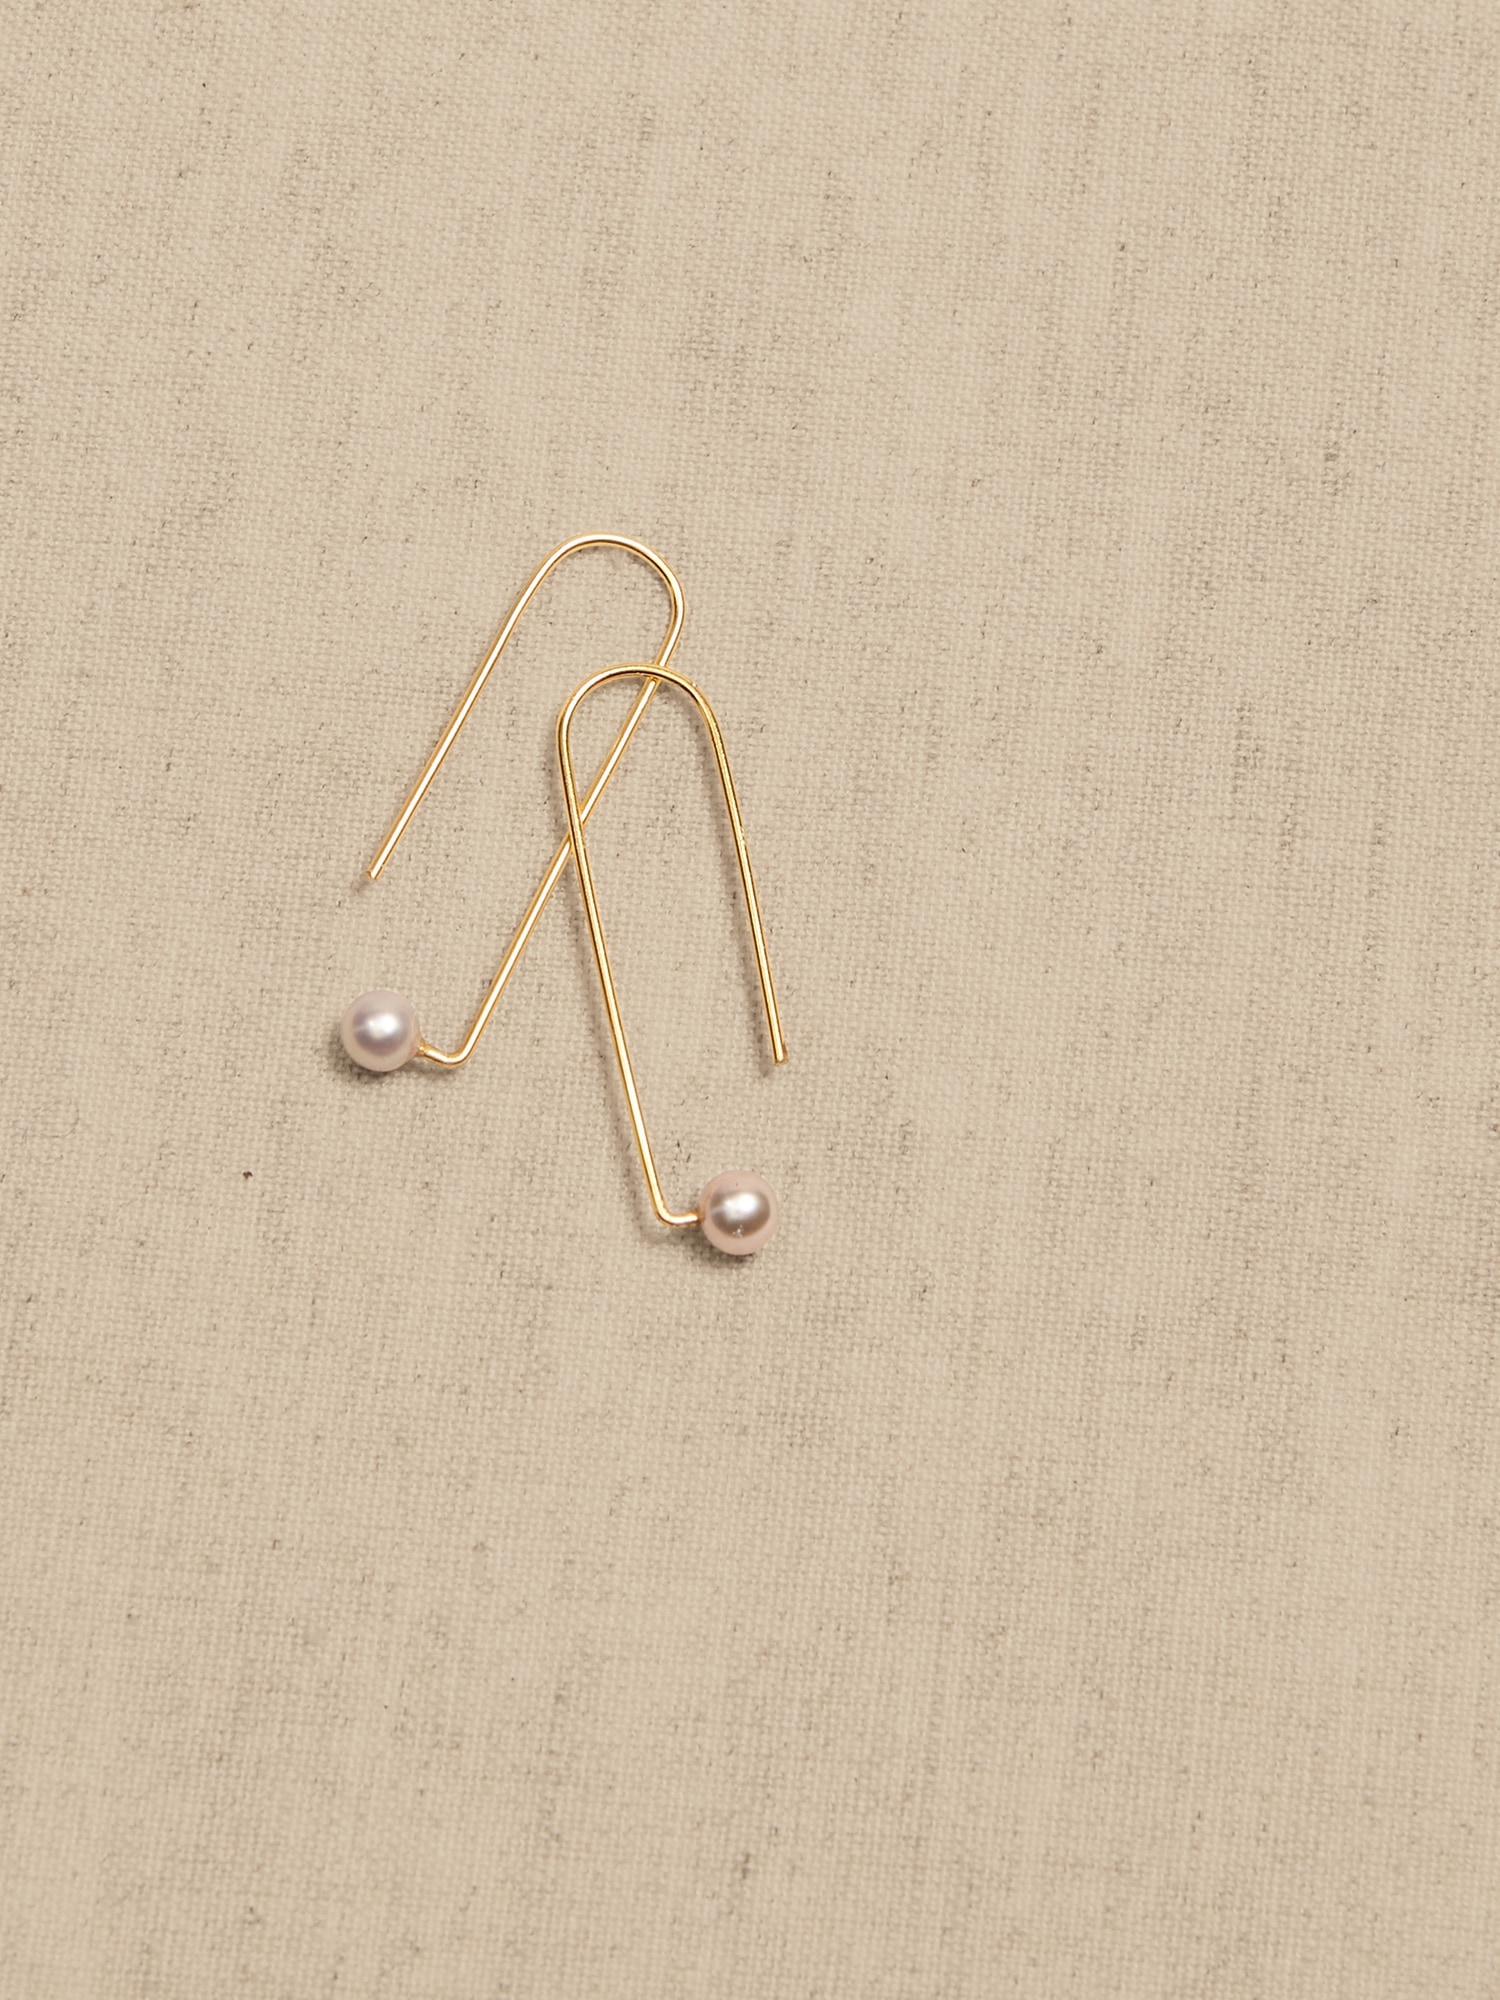 Delicate Pearl Curved Wire Earrings &#124 Aureus + Argent